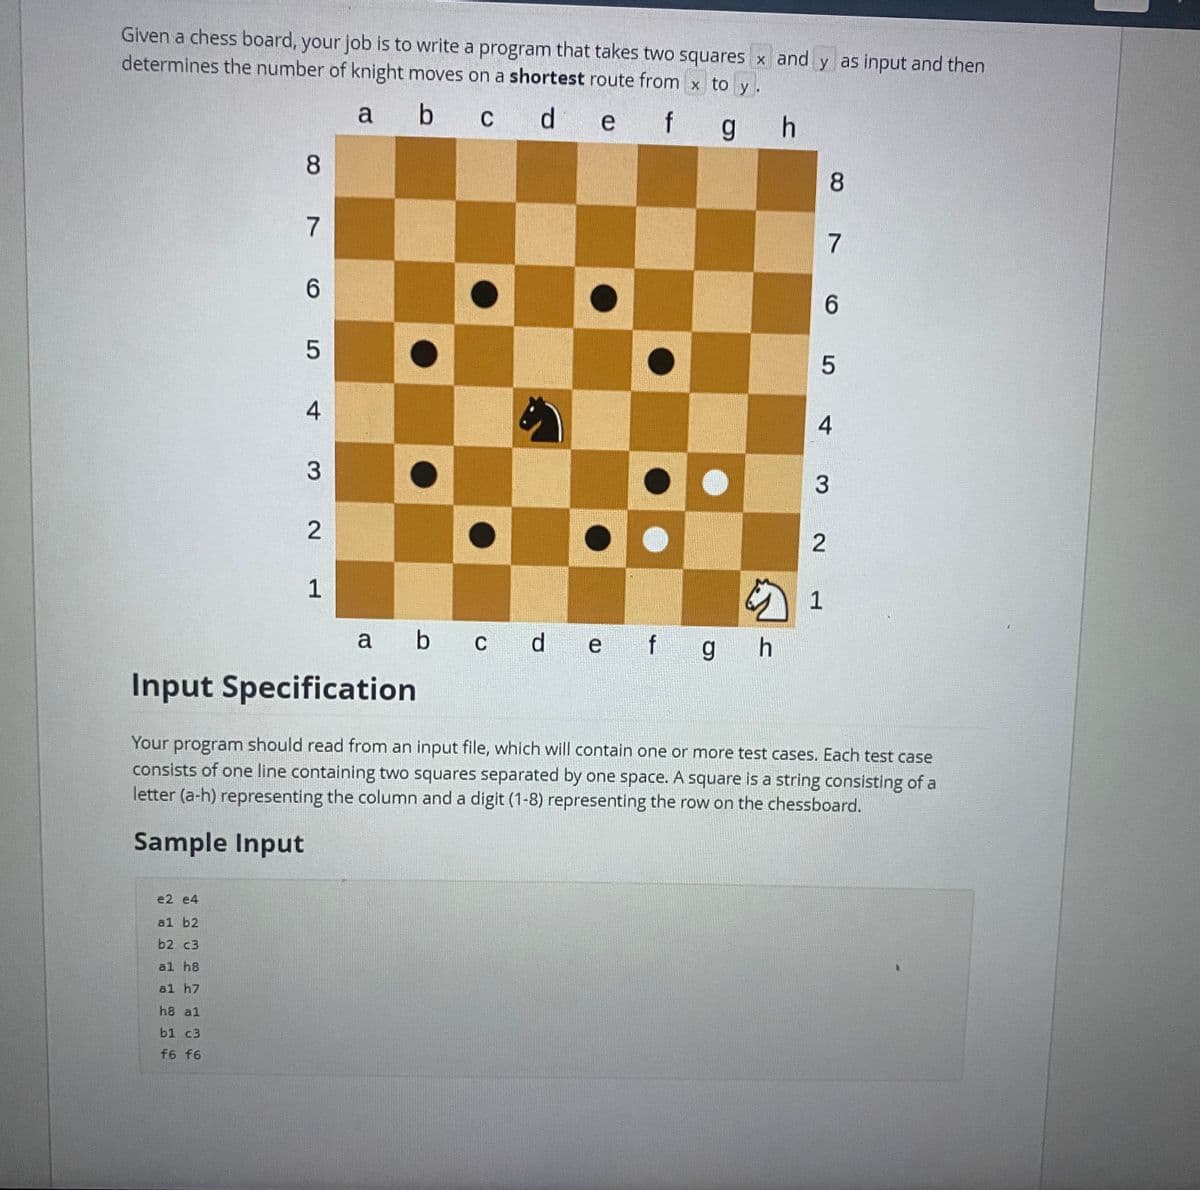 Given a chess board, your job is to write a program that takes two squares x and y as input and then
determines the number of knight moves on a shortest route from x to y.
a b c d e f g h
8
e2 e4
al b2
b2 c3
al h8
al h7
h8 al
b1 c3
f6 f6
7
6
5
4
3 2
1
a b c d e f g h
87
6
5
4
3
2
1
Input Specification
Your program should read from an input file, which will contain one or more test cases. Each test case
consists of one line containing two squares separated by one space. A square is a string consisting of a
letter (a-h) representing the column and a digit (1-8) representing the row on the chessboard.
Sample Input